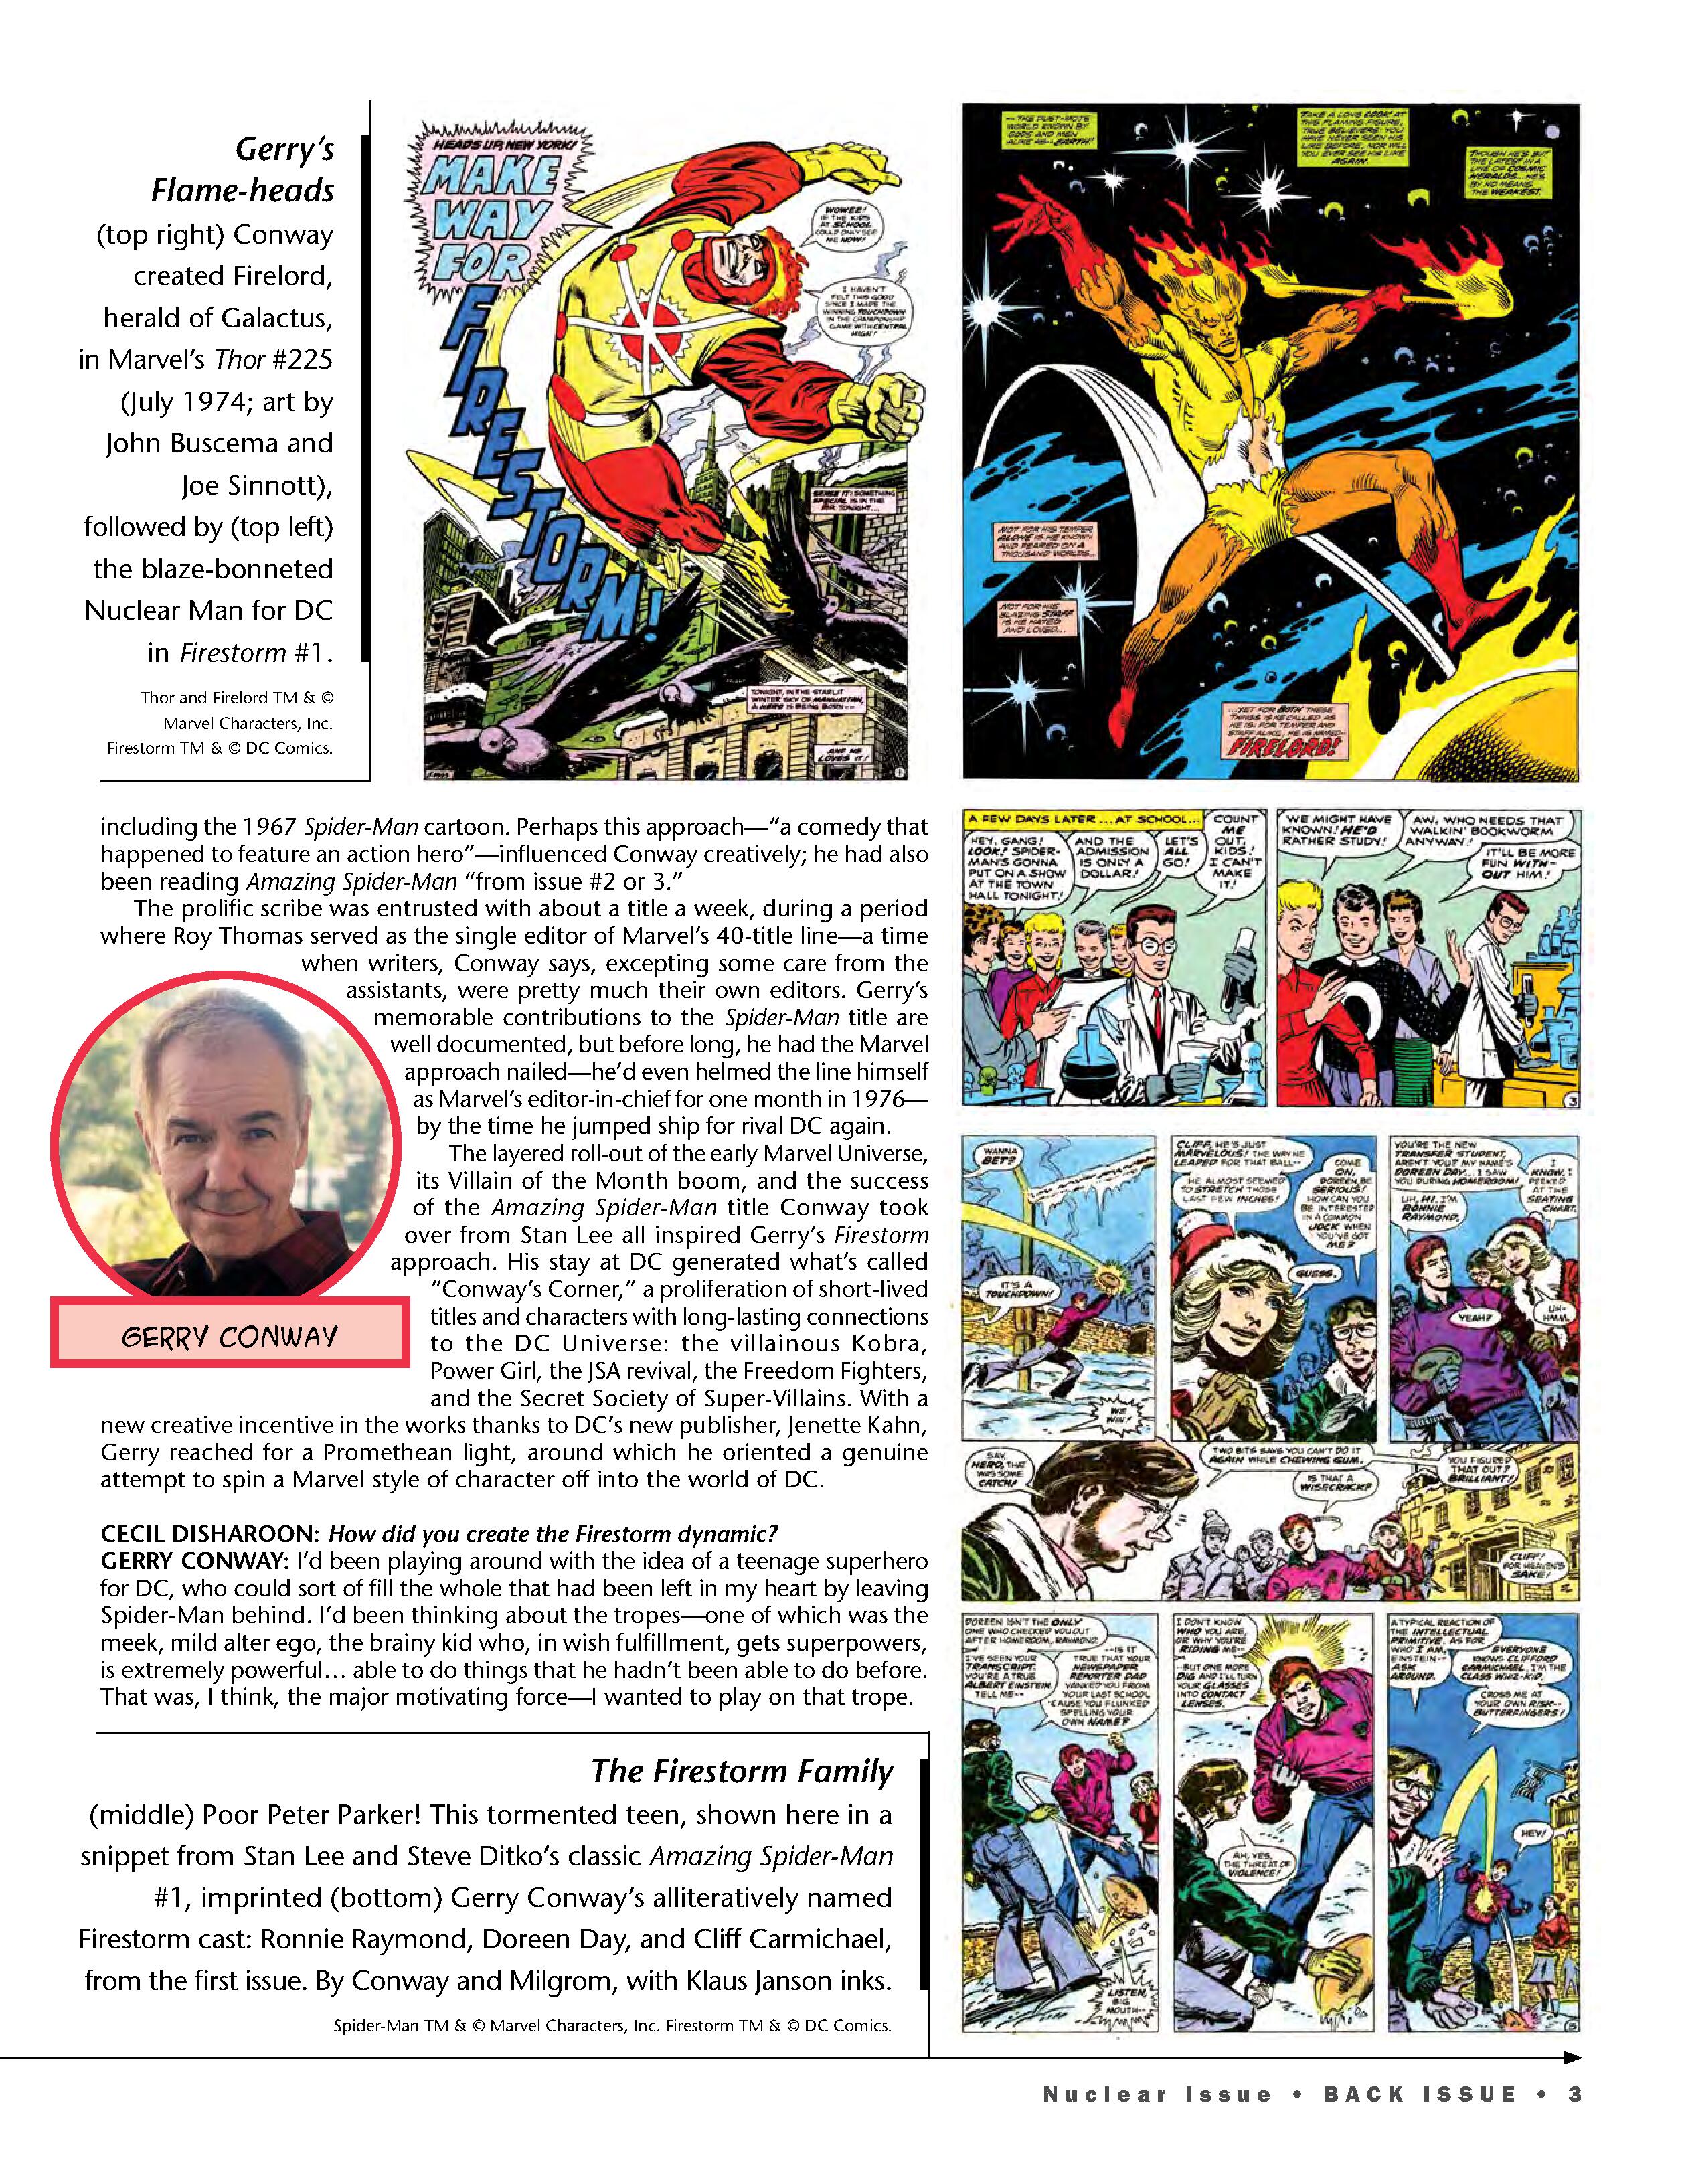 Read online Back Issue comic -  Issue #112 - 5